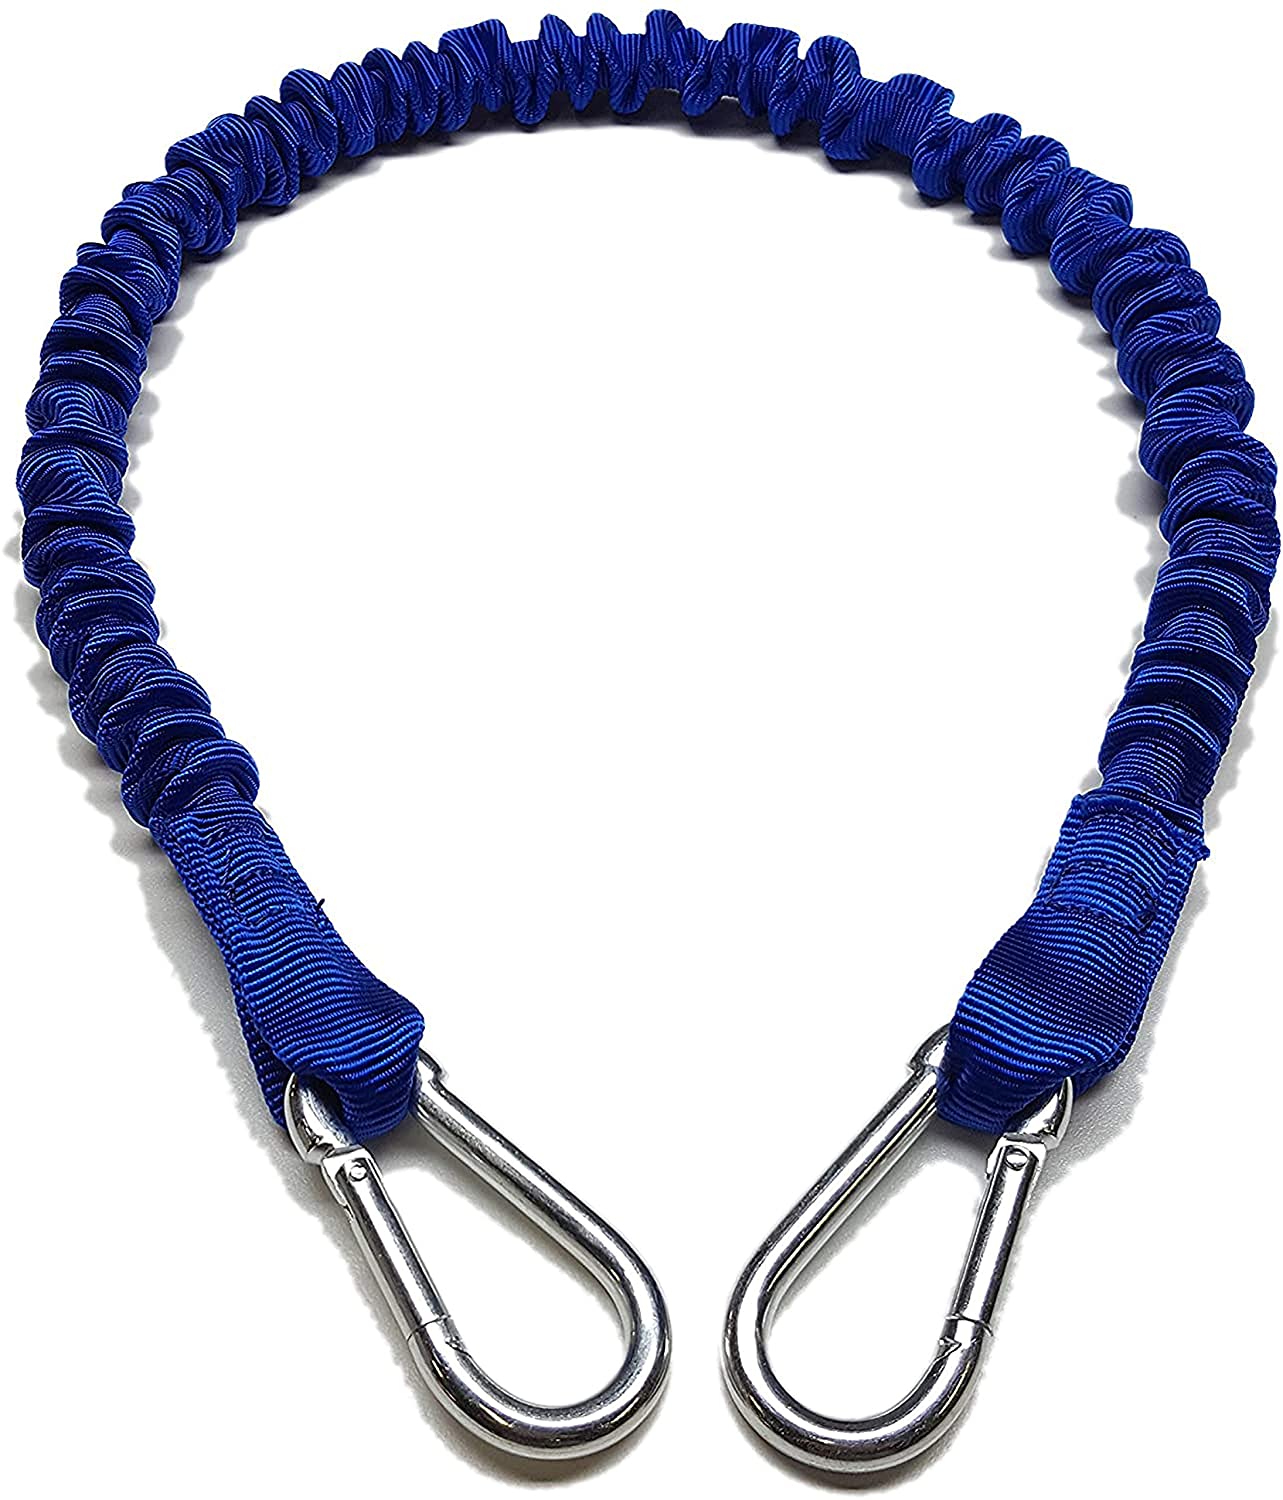 Bungee Cords - 24